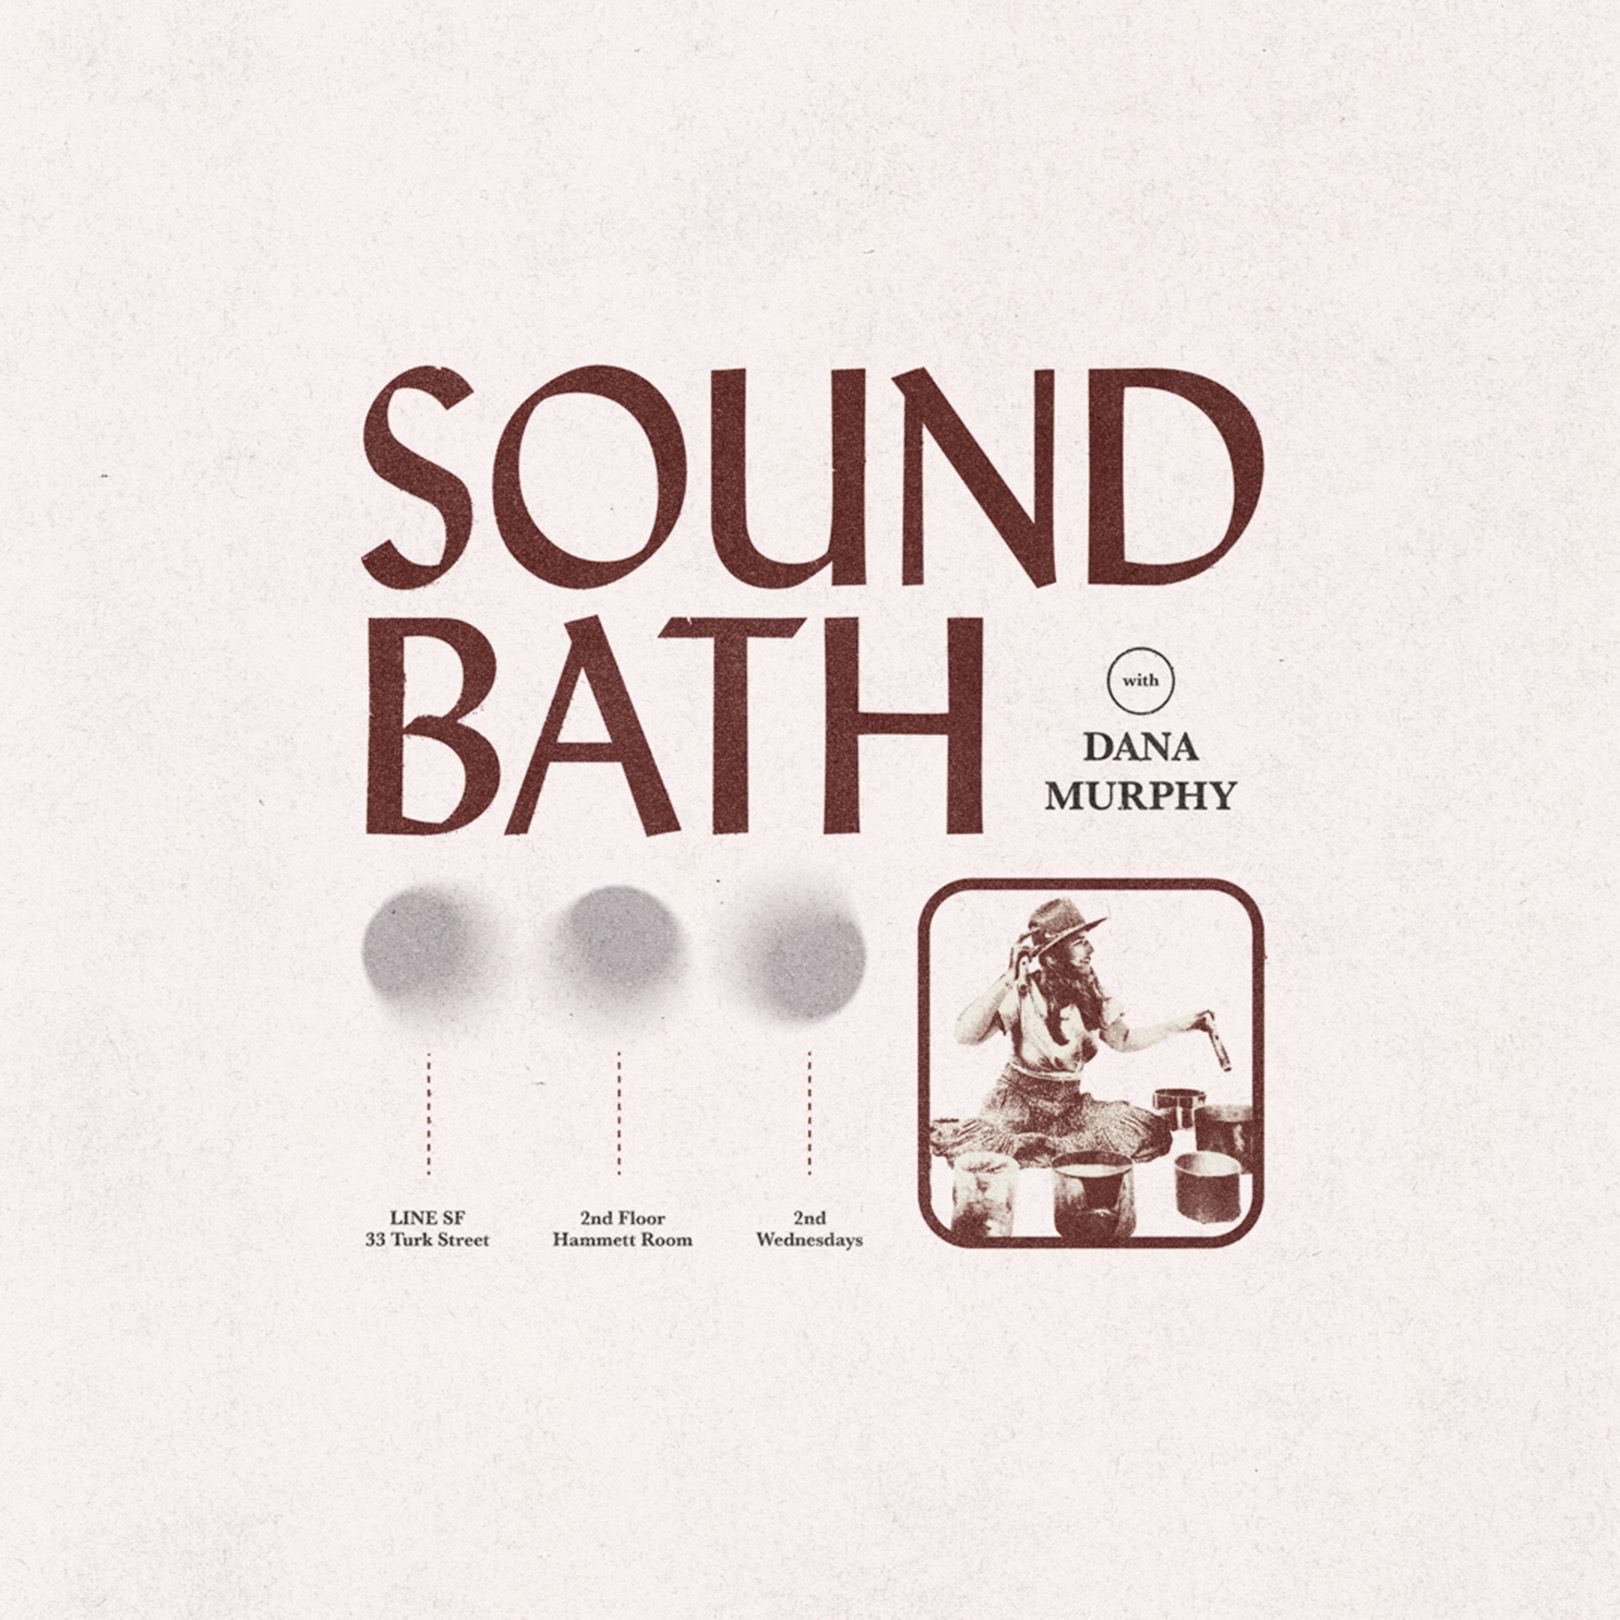 A pink poster for Sound Bath with Dana Murphy every second Wednesday at the LINE San Francisco